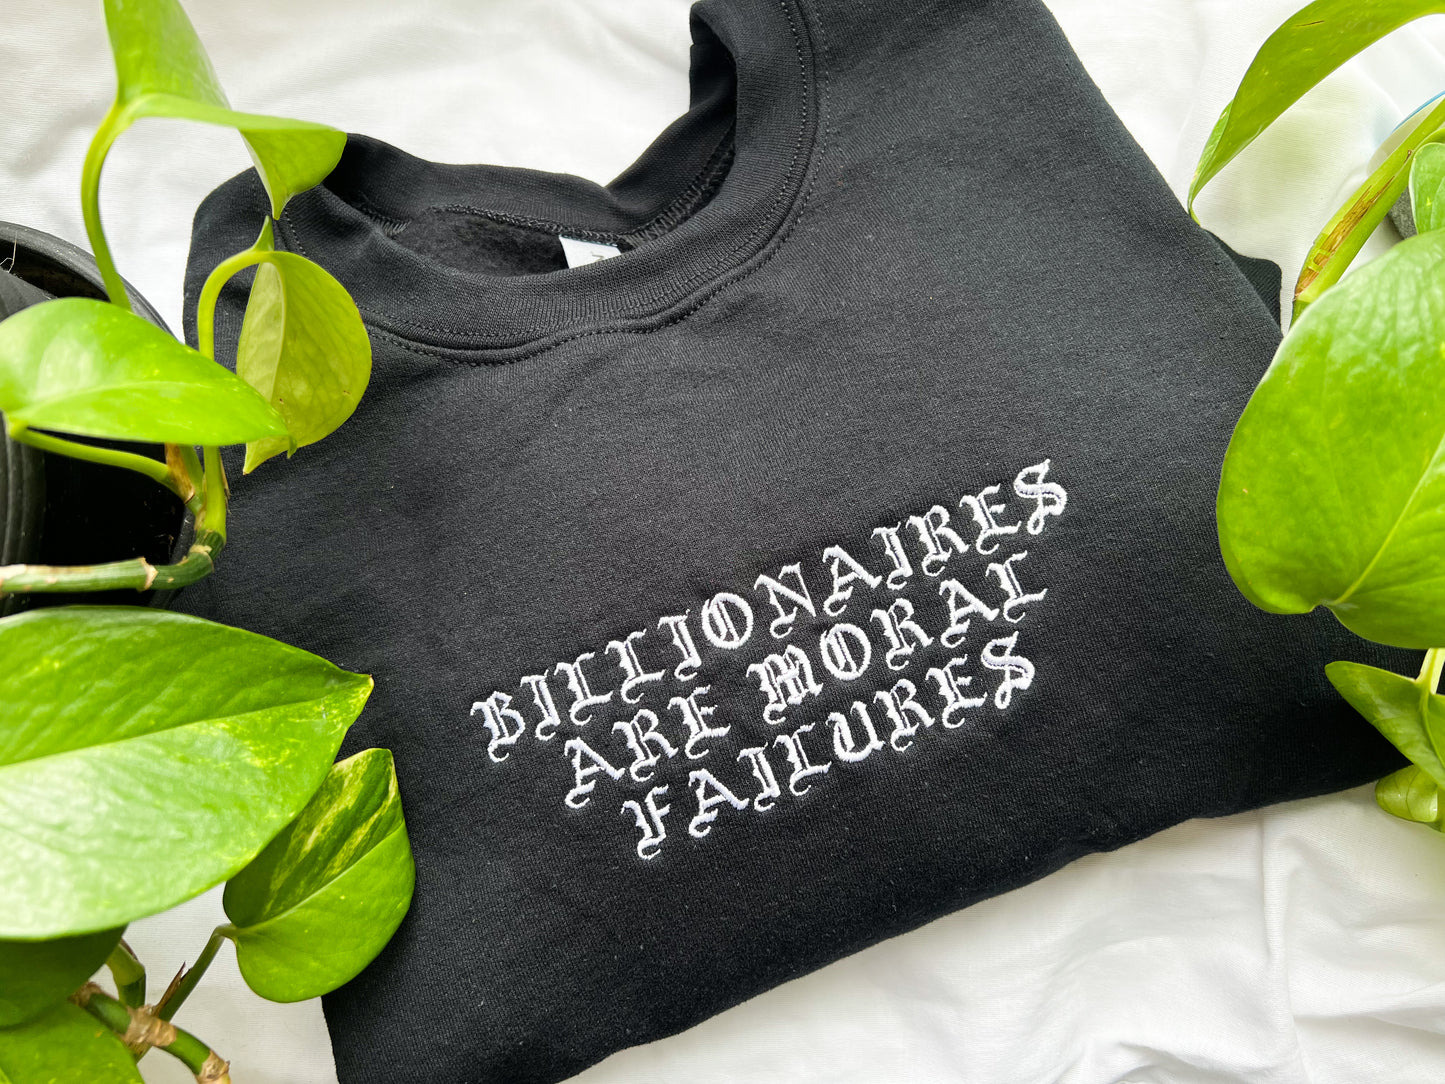 billionaires are moral failures embroidered crewneck (PREORDER)